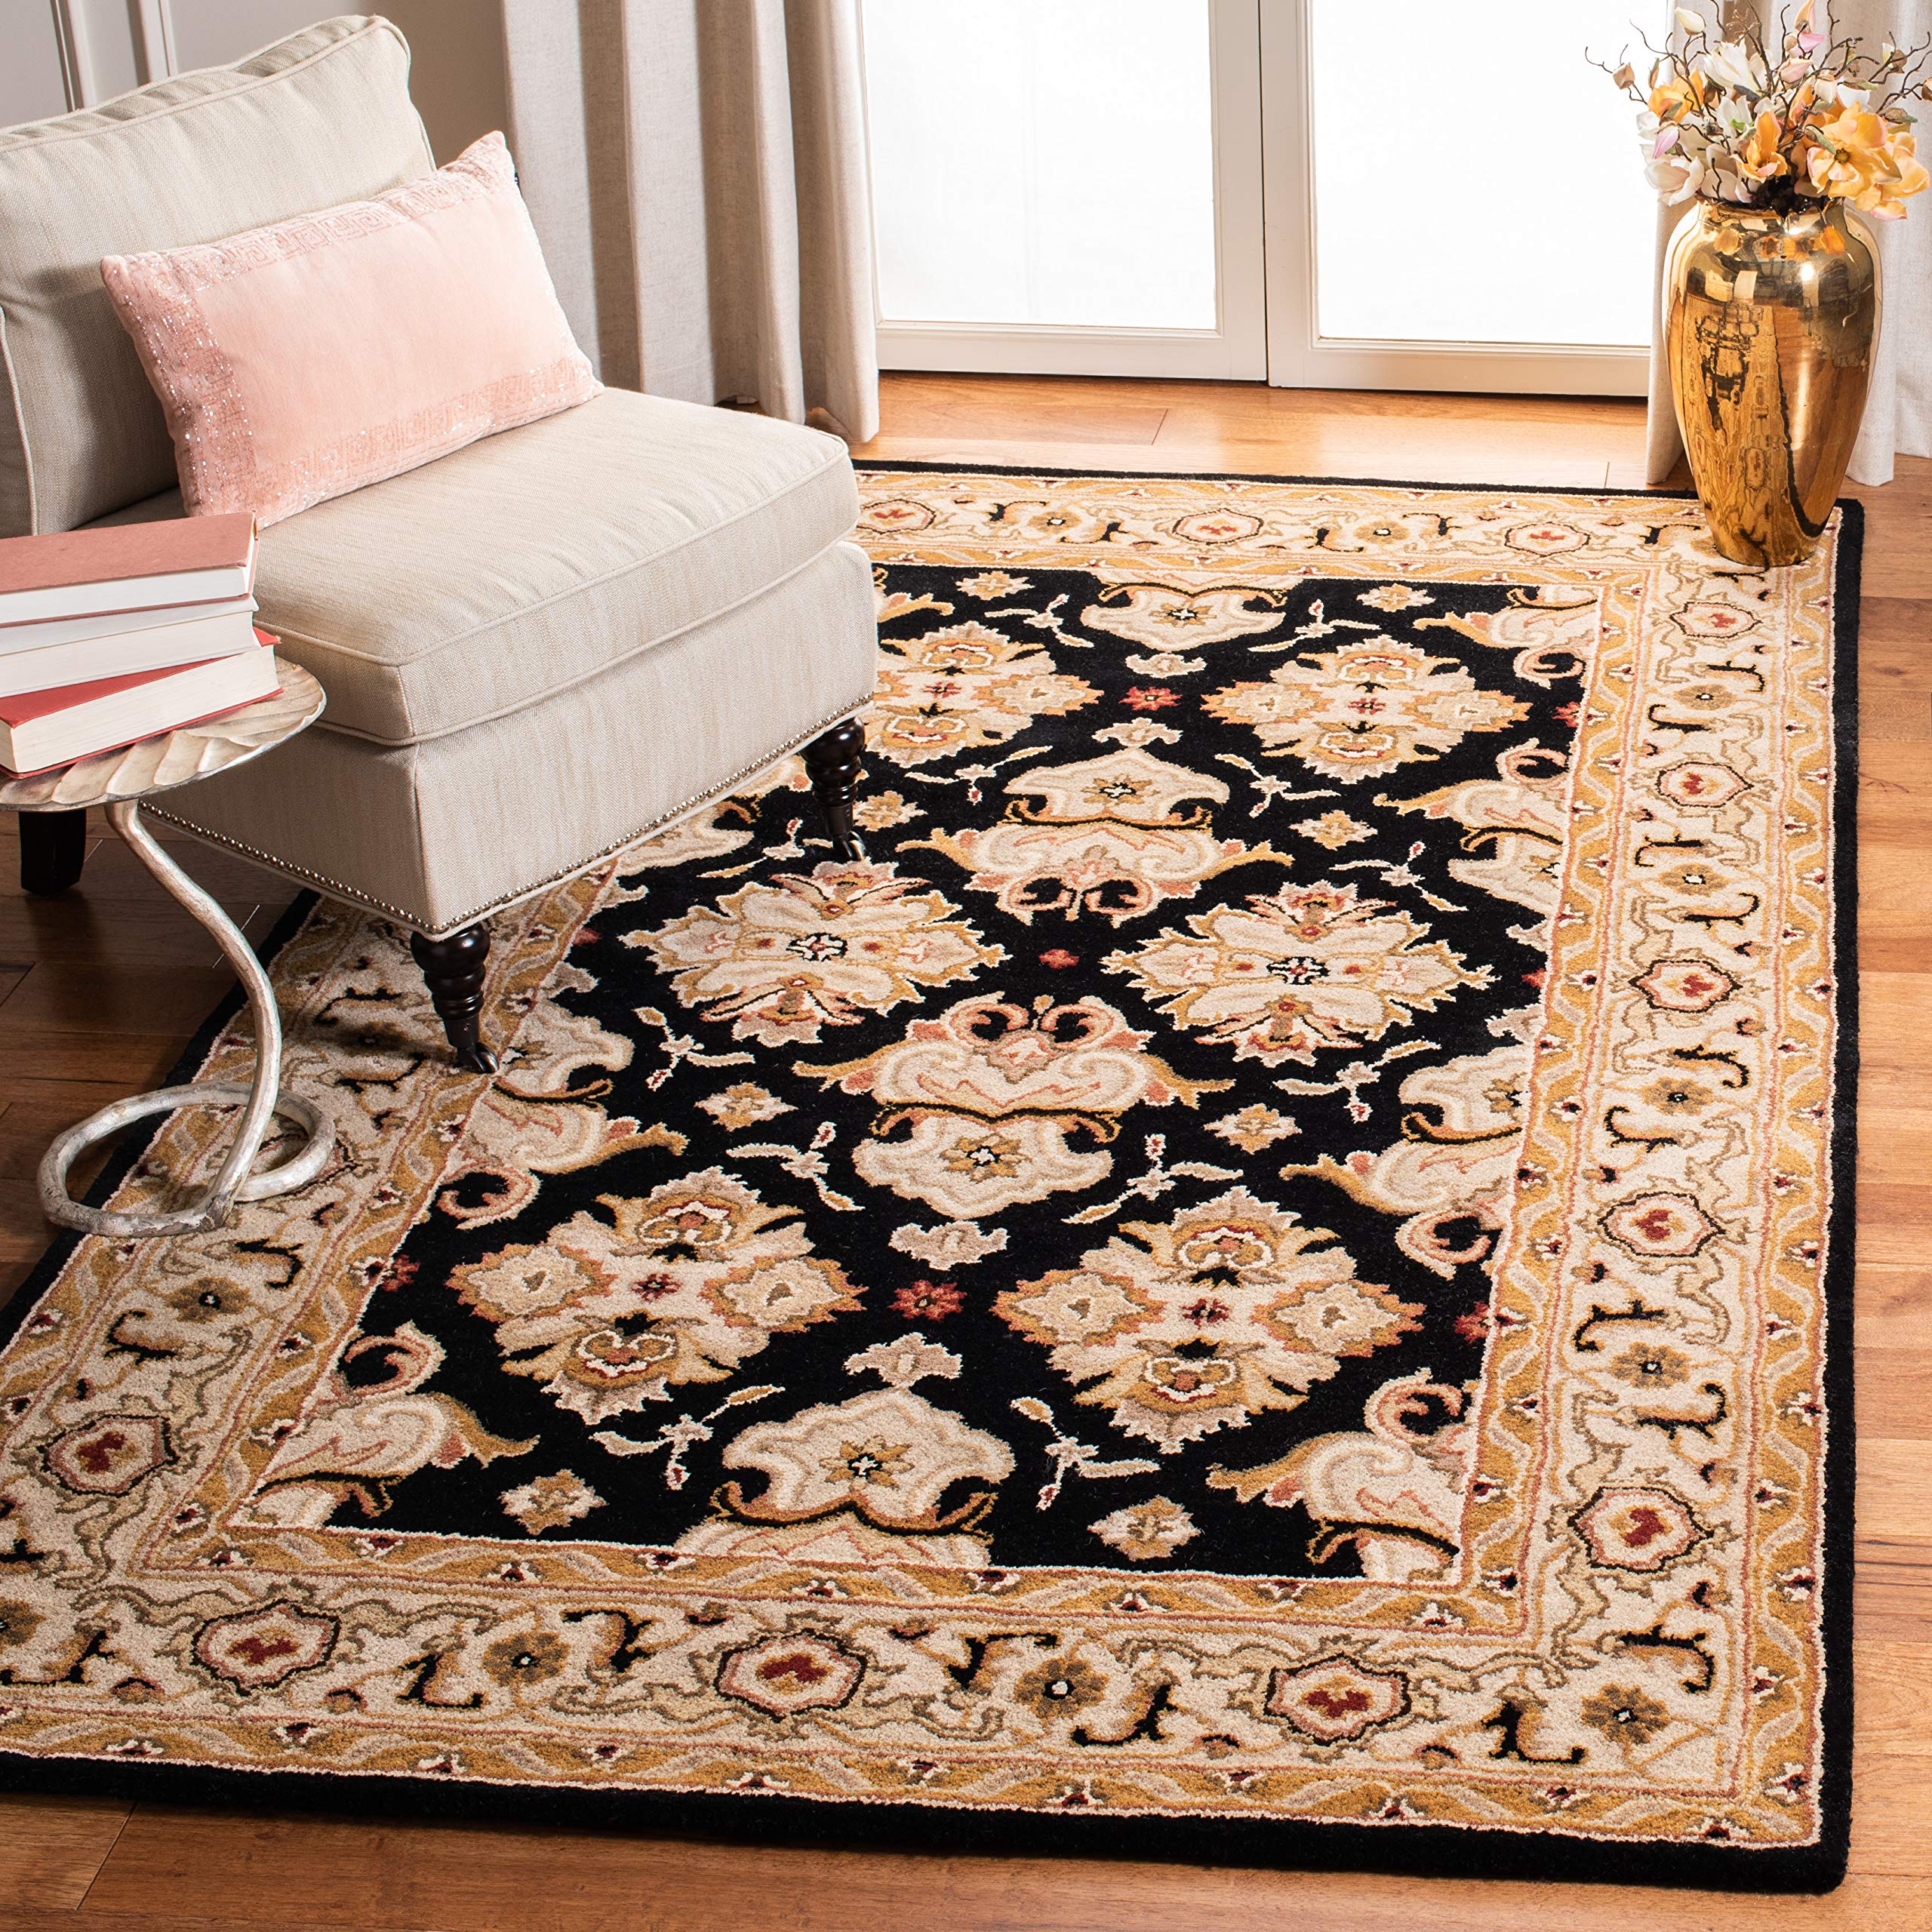 SAFAVIEH Heritage Collection 3' x 5' Black/Ivory HG817A Handmade Traditional Oriental Premium Wool Area Rug